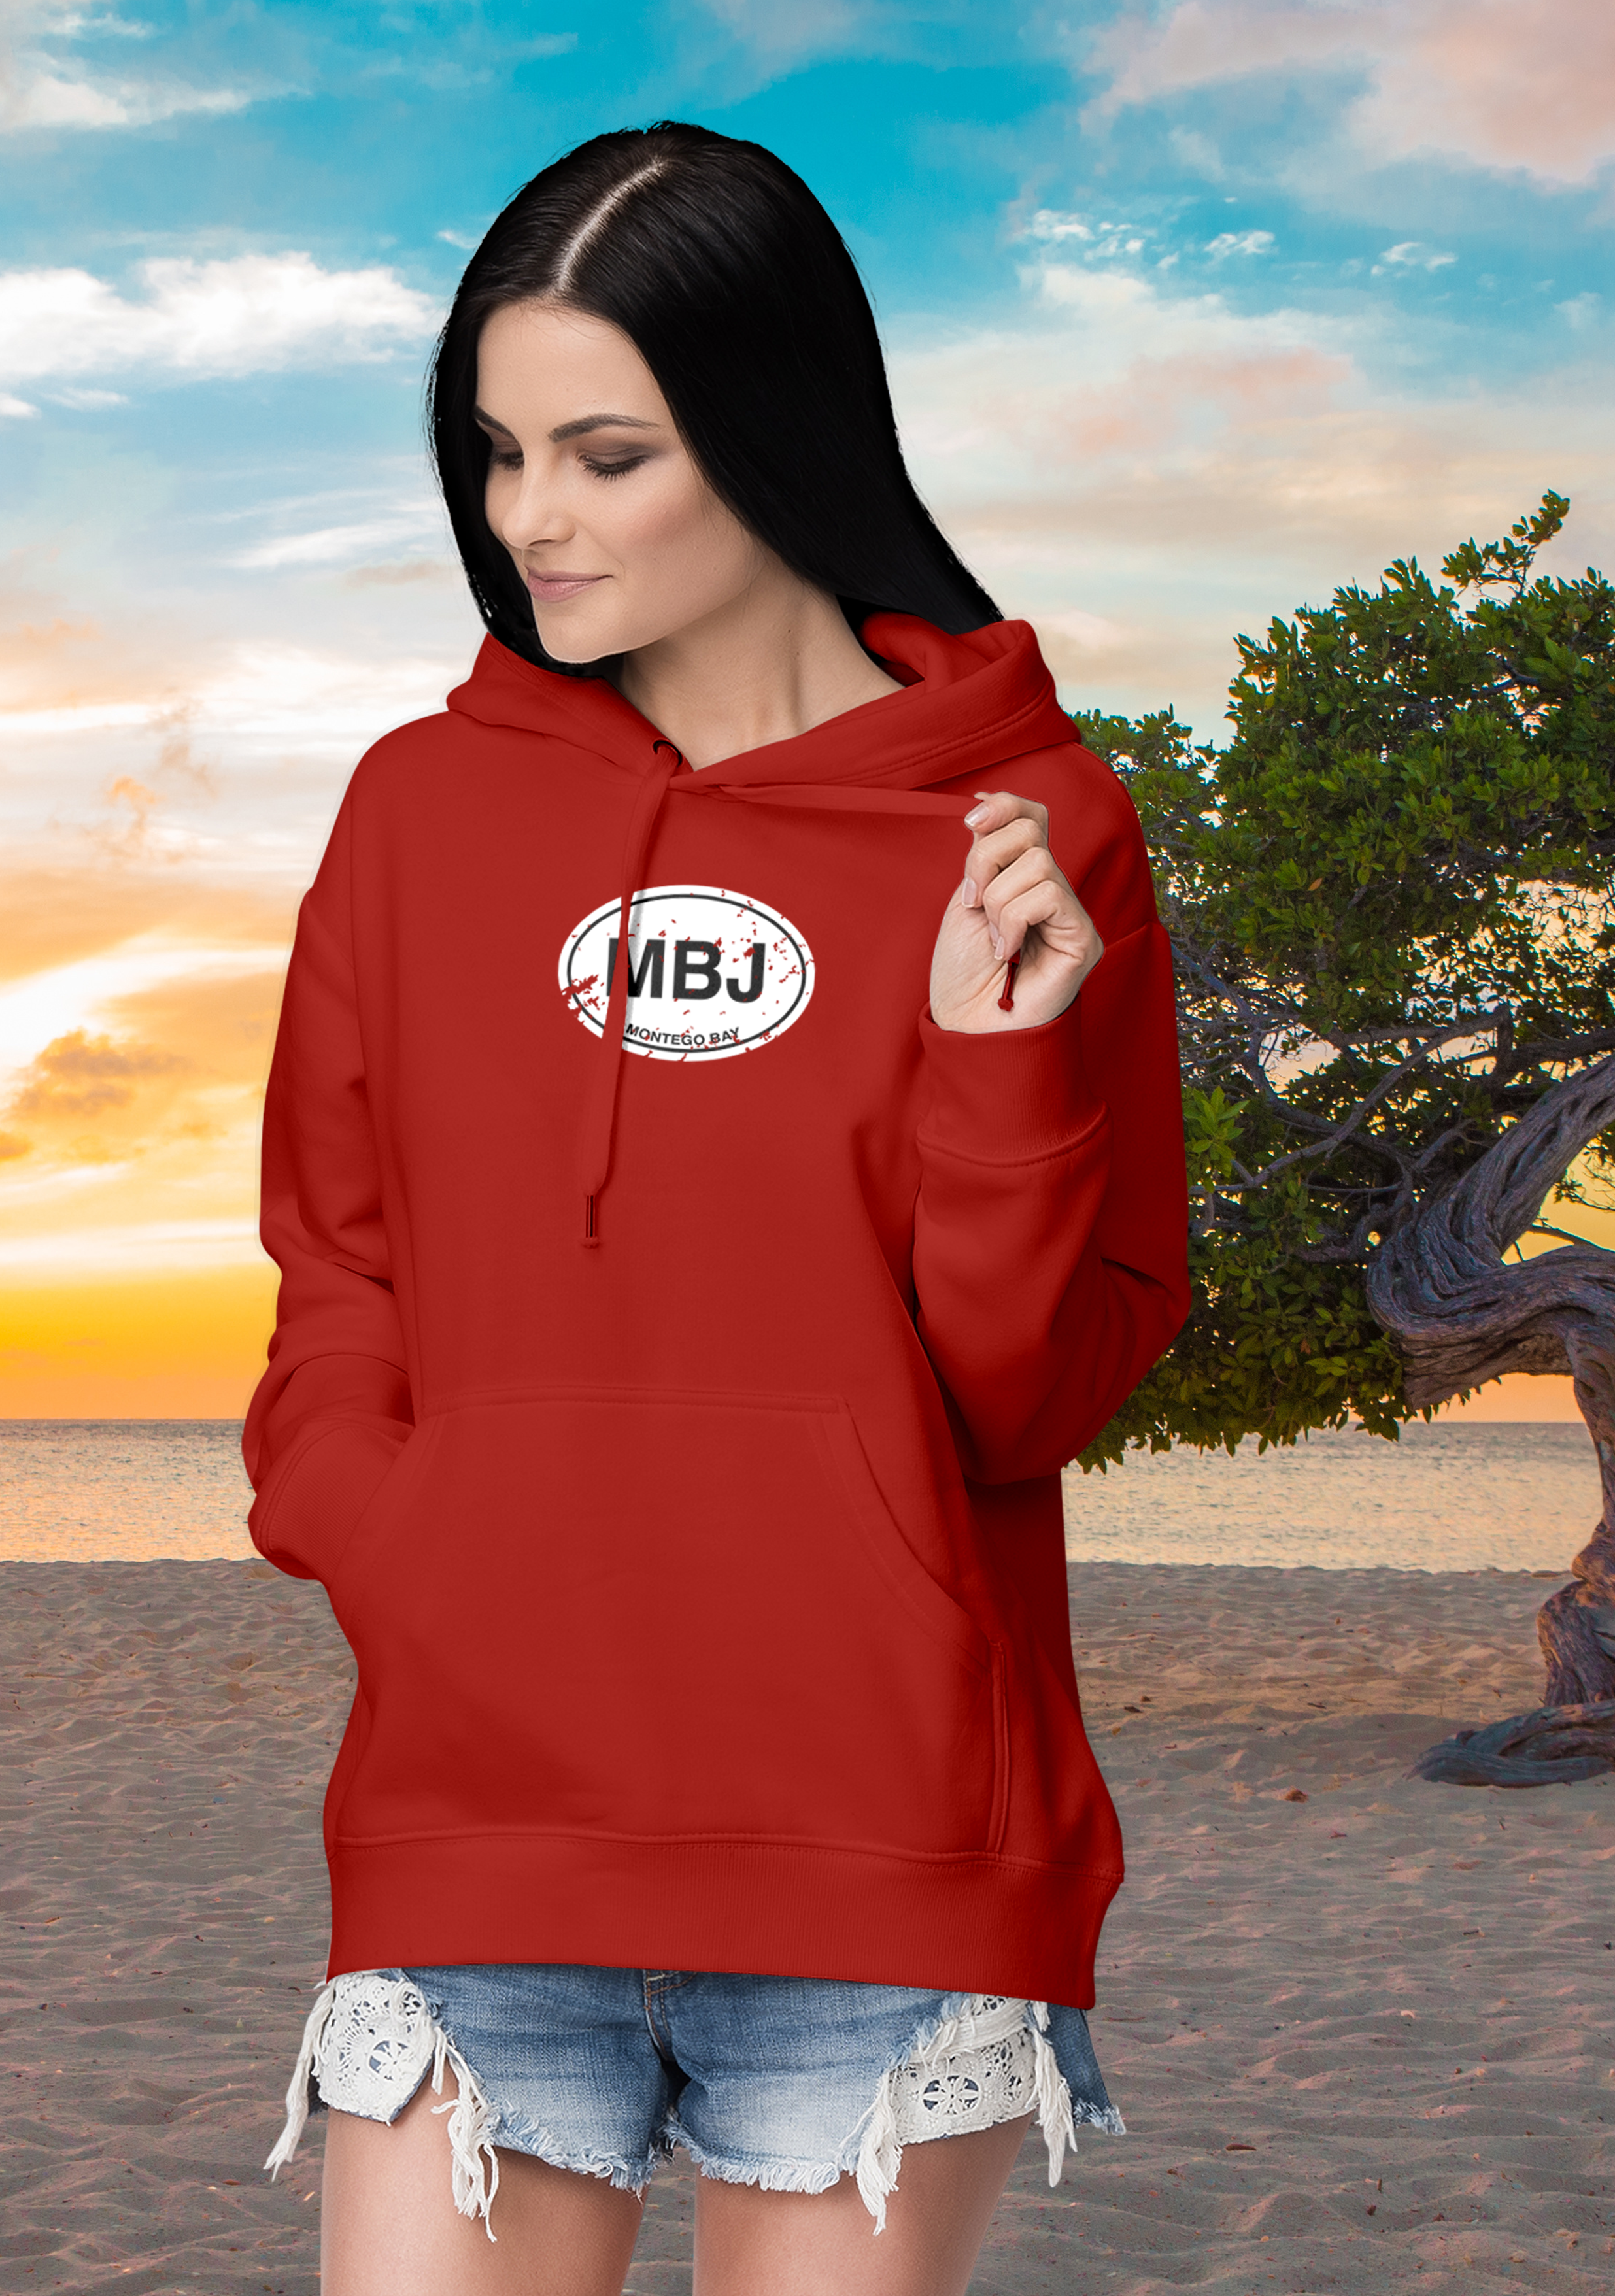 Montego Bay Men's and Women's Classic Adult Hoodie - My Destination Location